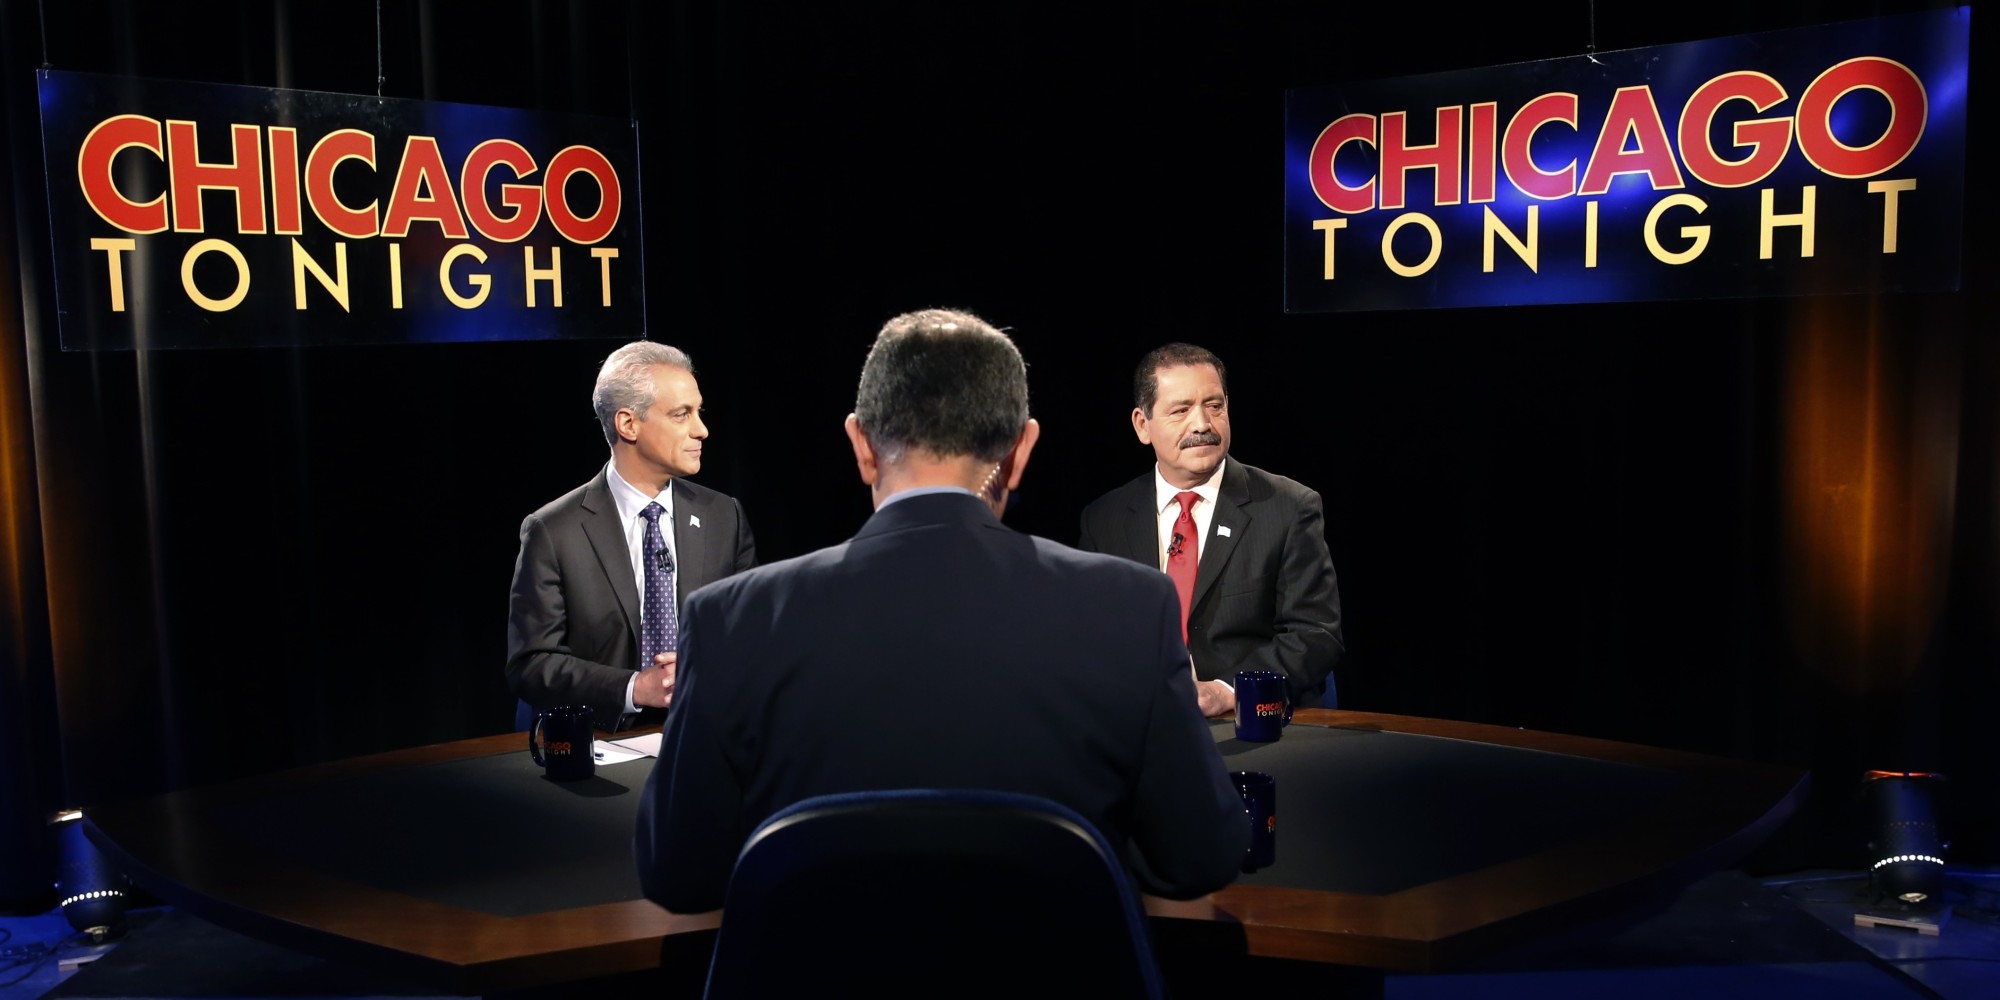 Chicago Debate Moderator Booed For Repeatedly Questioning Chuy Garcia